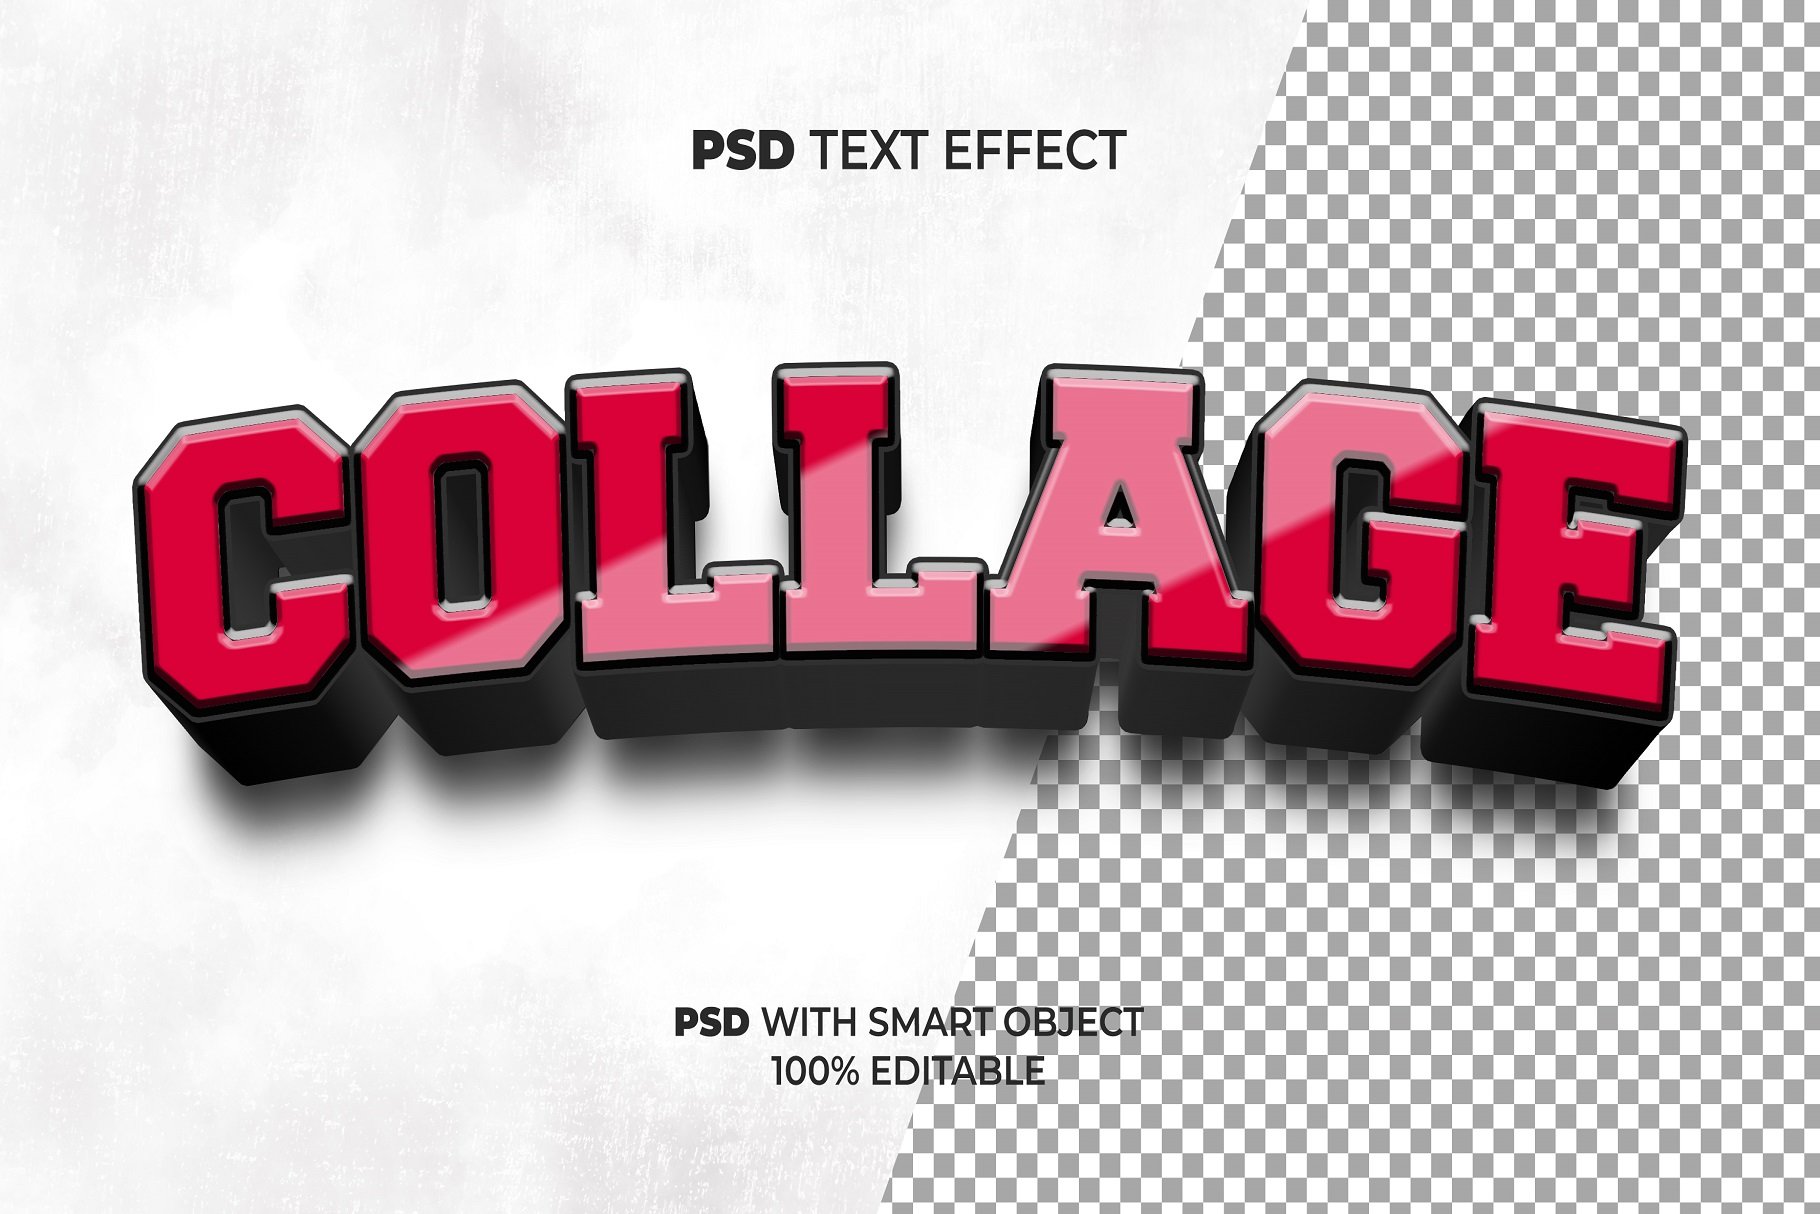 3D Text Effect Collage Stylepreview image.